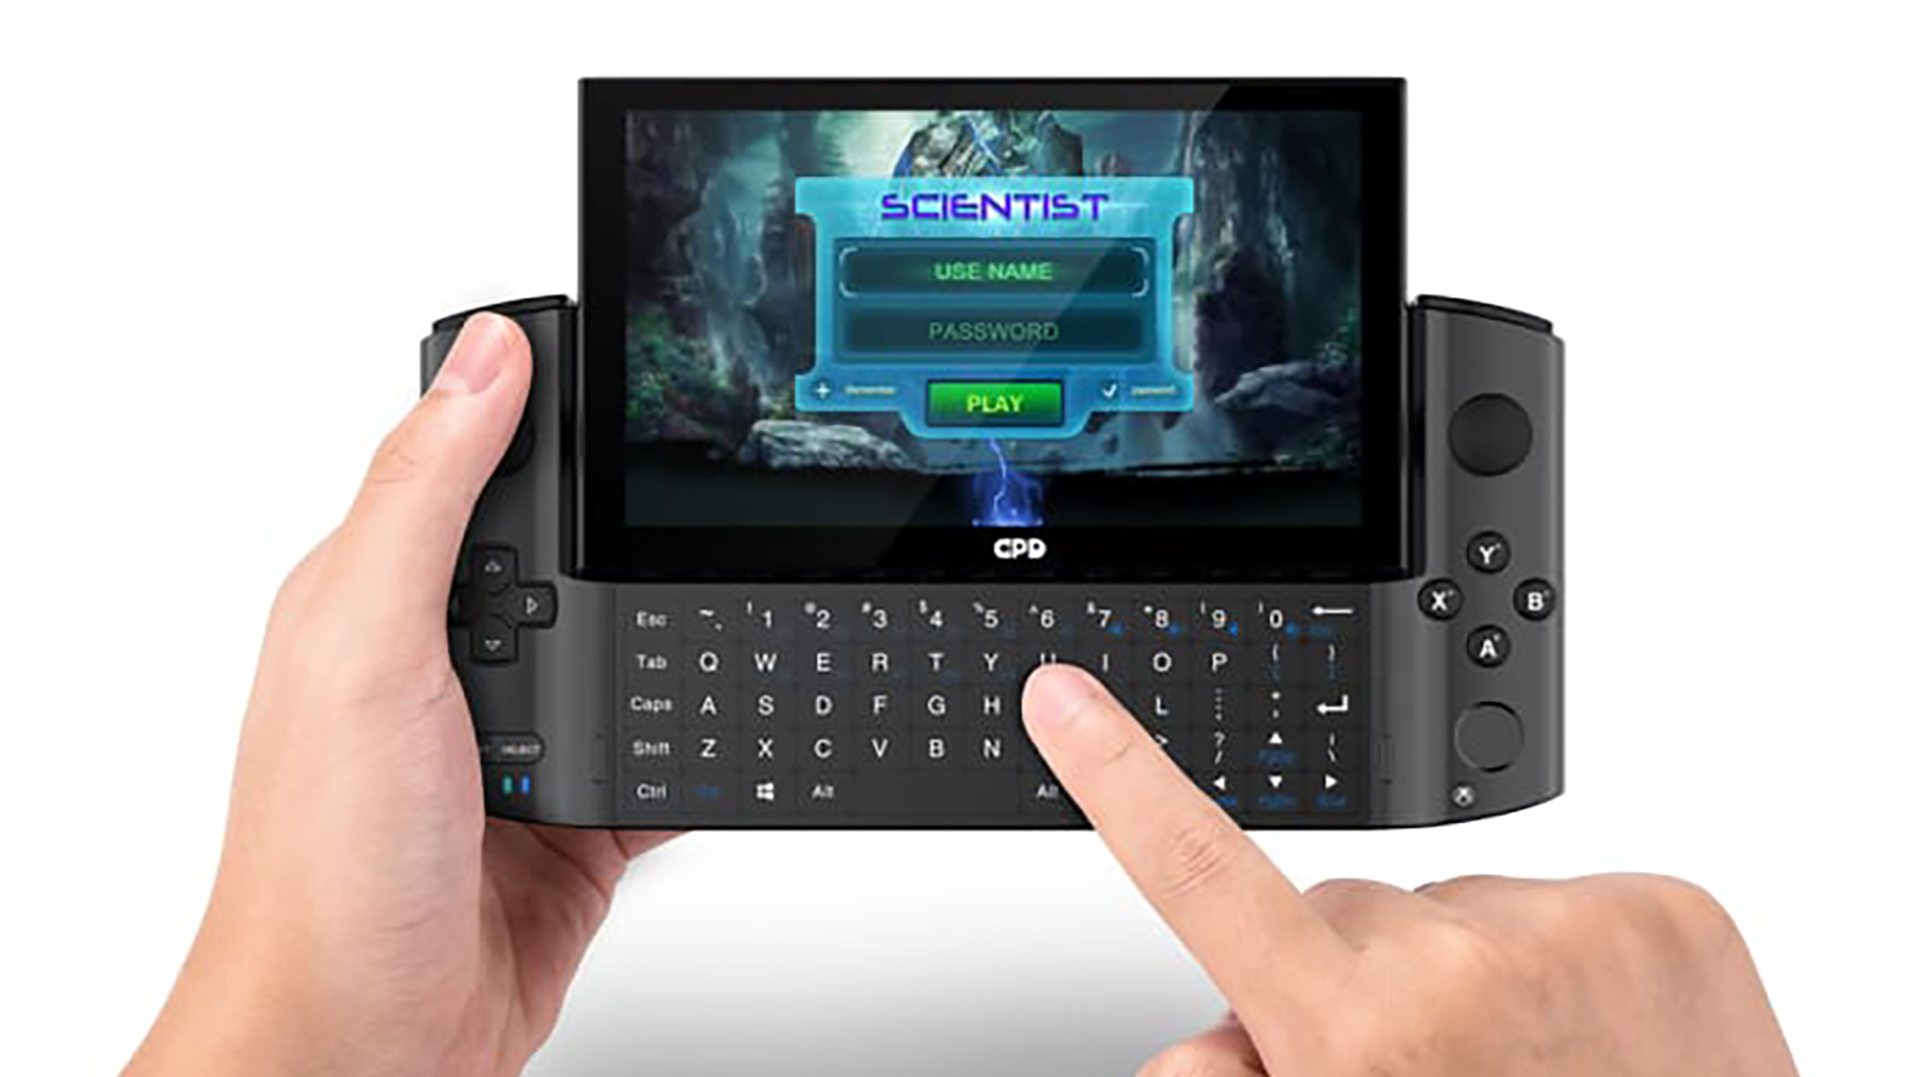 This Intel Xepowered PC handheld might be the Switch alternative we've